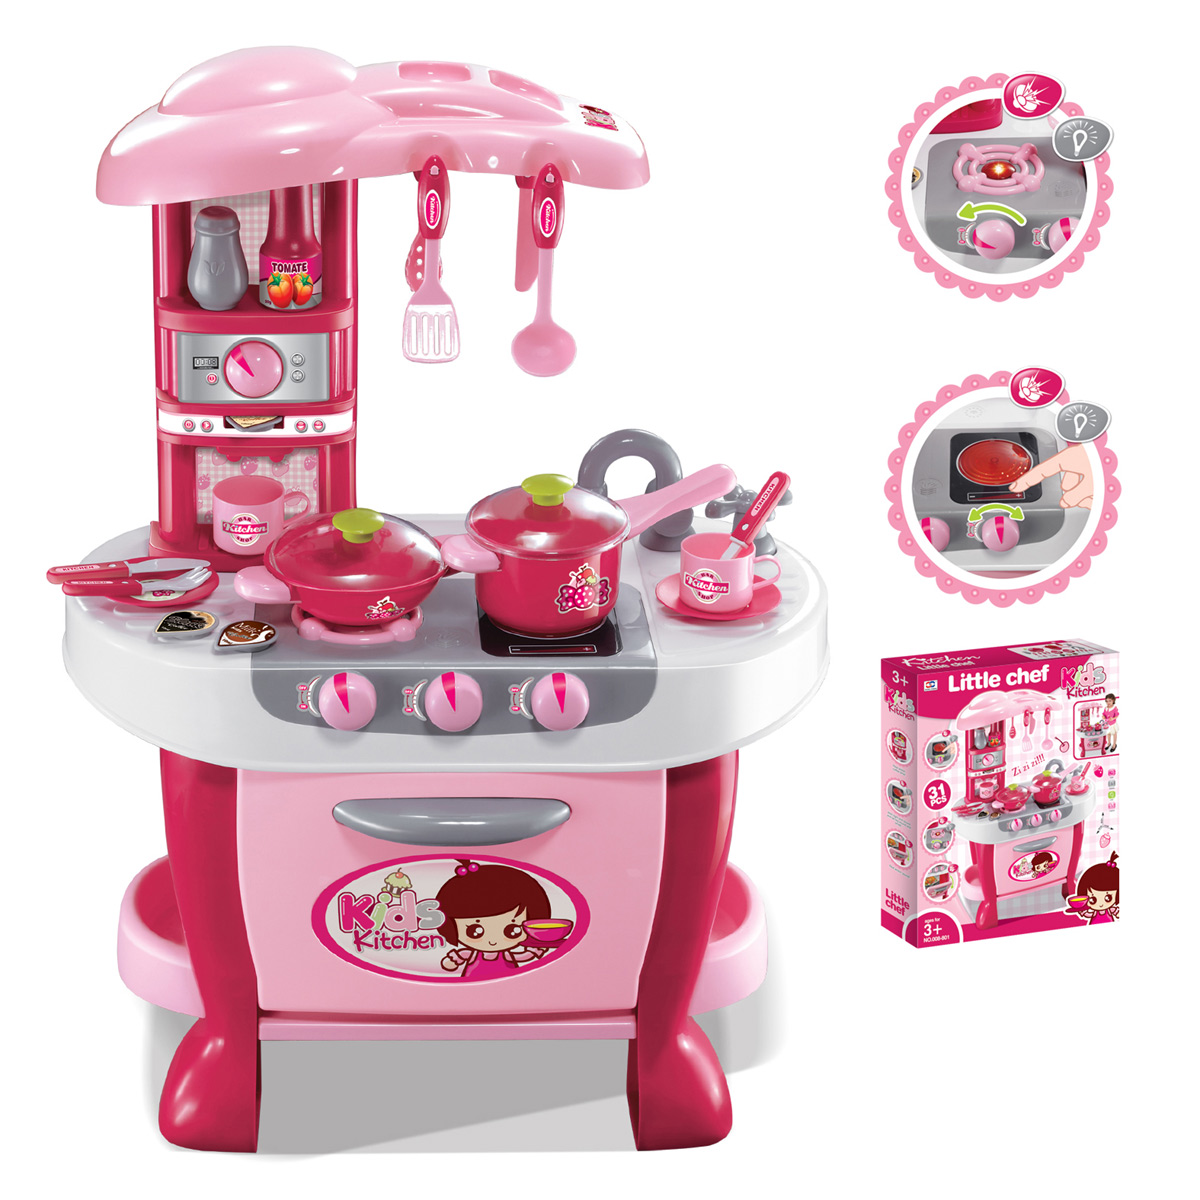 Picture of AZ Trading NC33177-AZ iBot Deluxe Kitchen Appliance Cooking Play Set with Lights & Sound